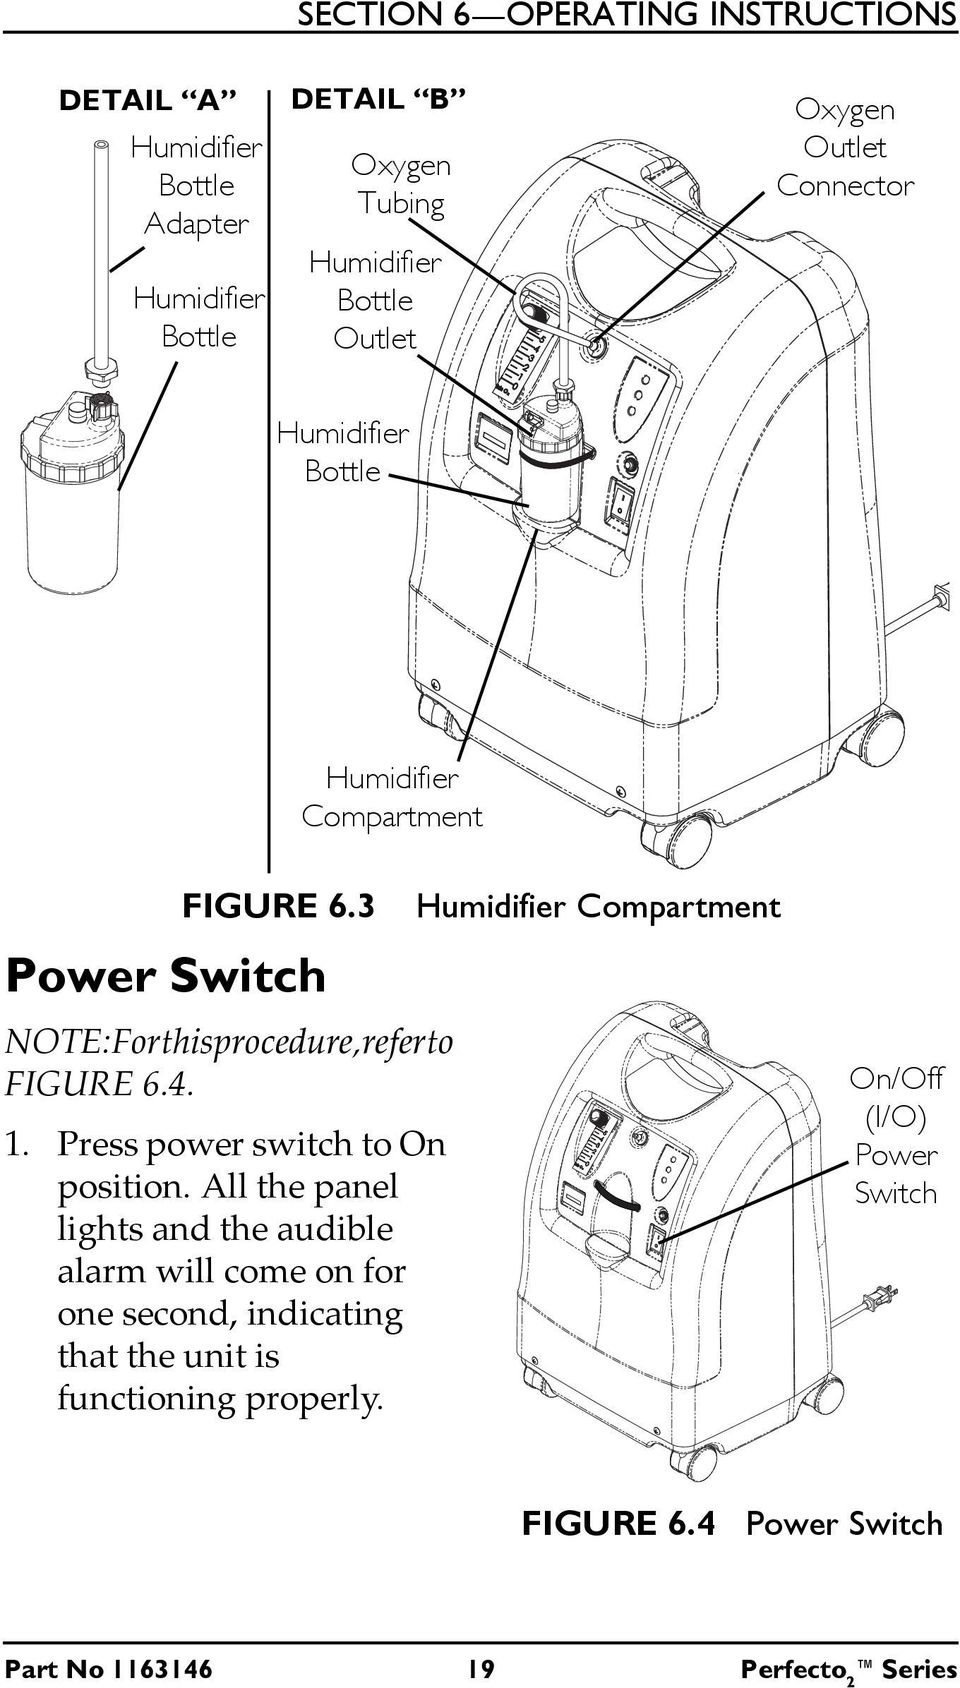 1. Press power switch to On position.